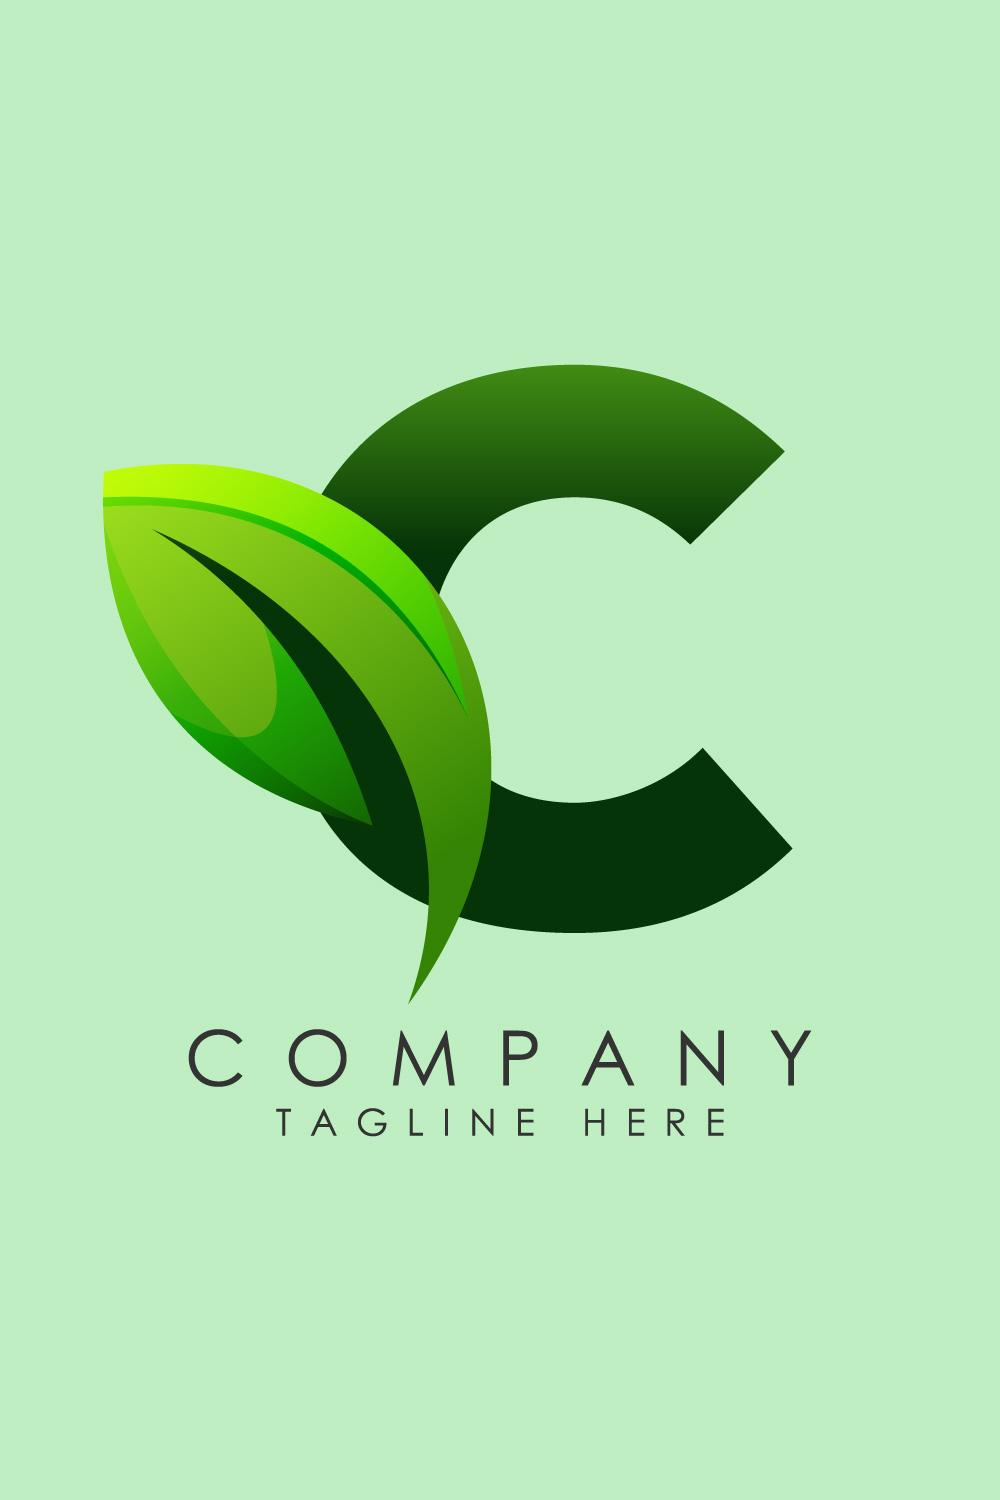 Initial C alphabet with a leaf Eco-friendly logo concept Graphic alphabet symbol for business and company identity pinterest preview image.